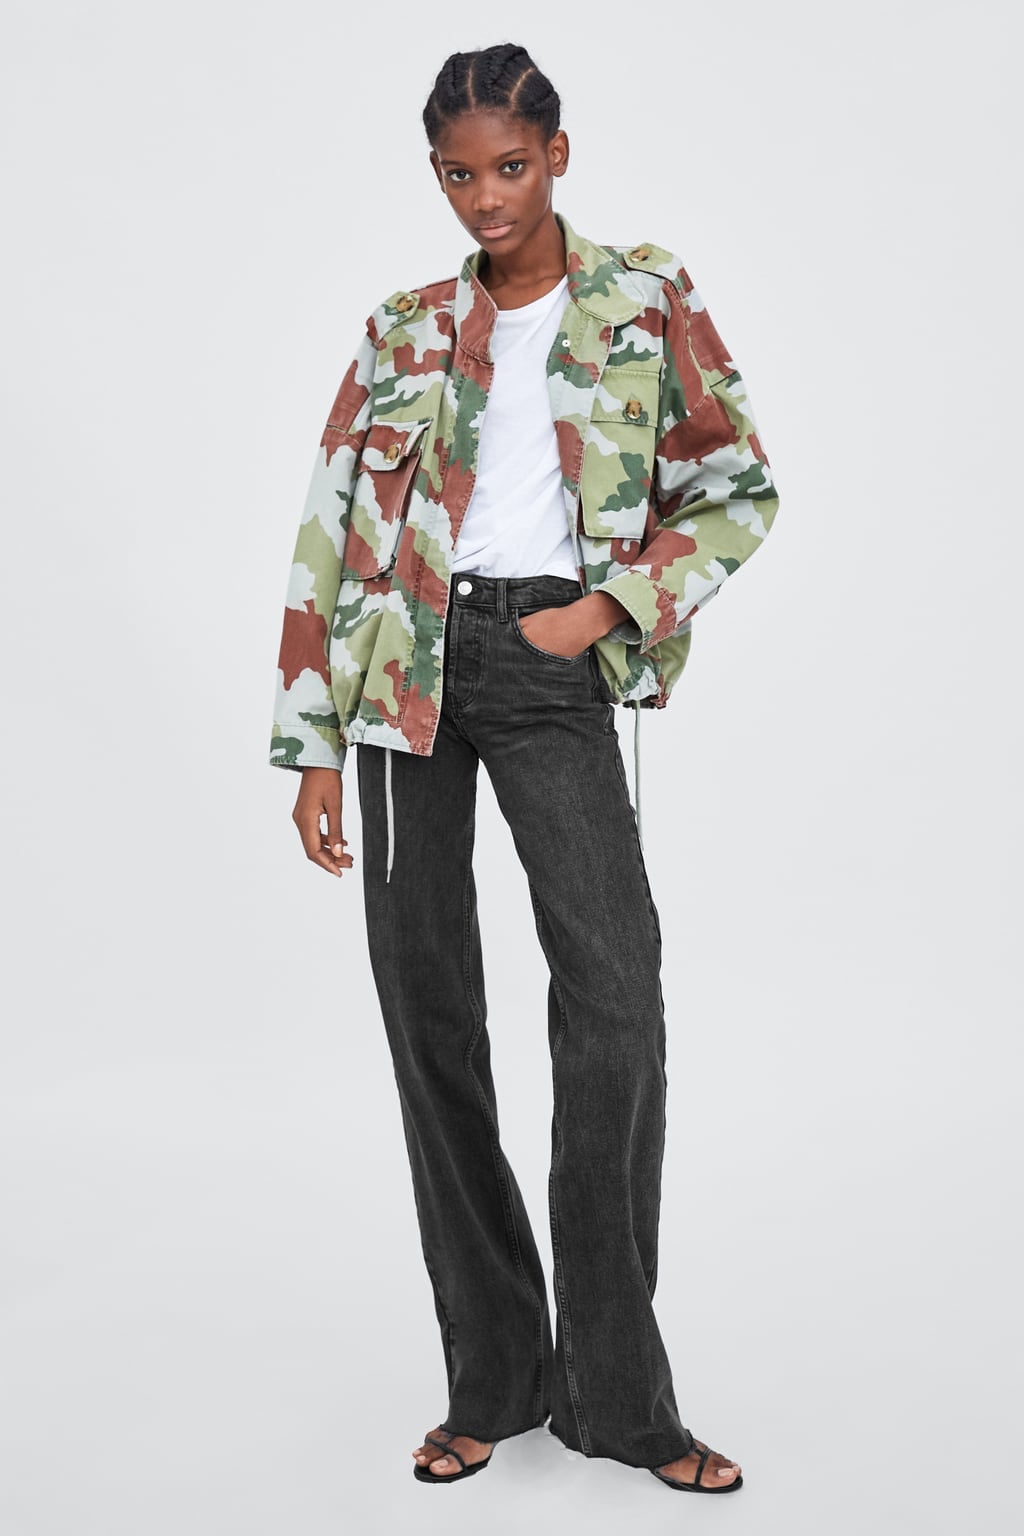 Camouflage | Victoria Beckham's For Her Runway Show in the Cozy Outfit You Wear on a Plane | POPSUGAR Photo 5